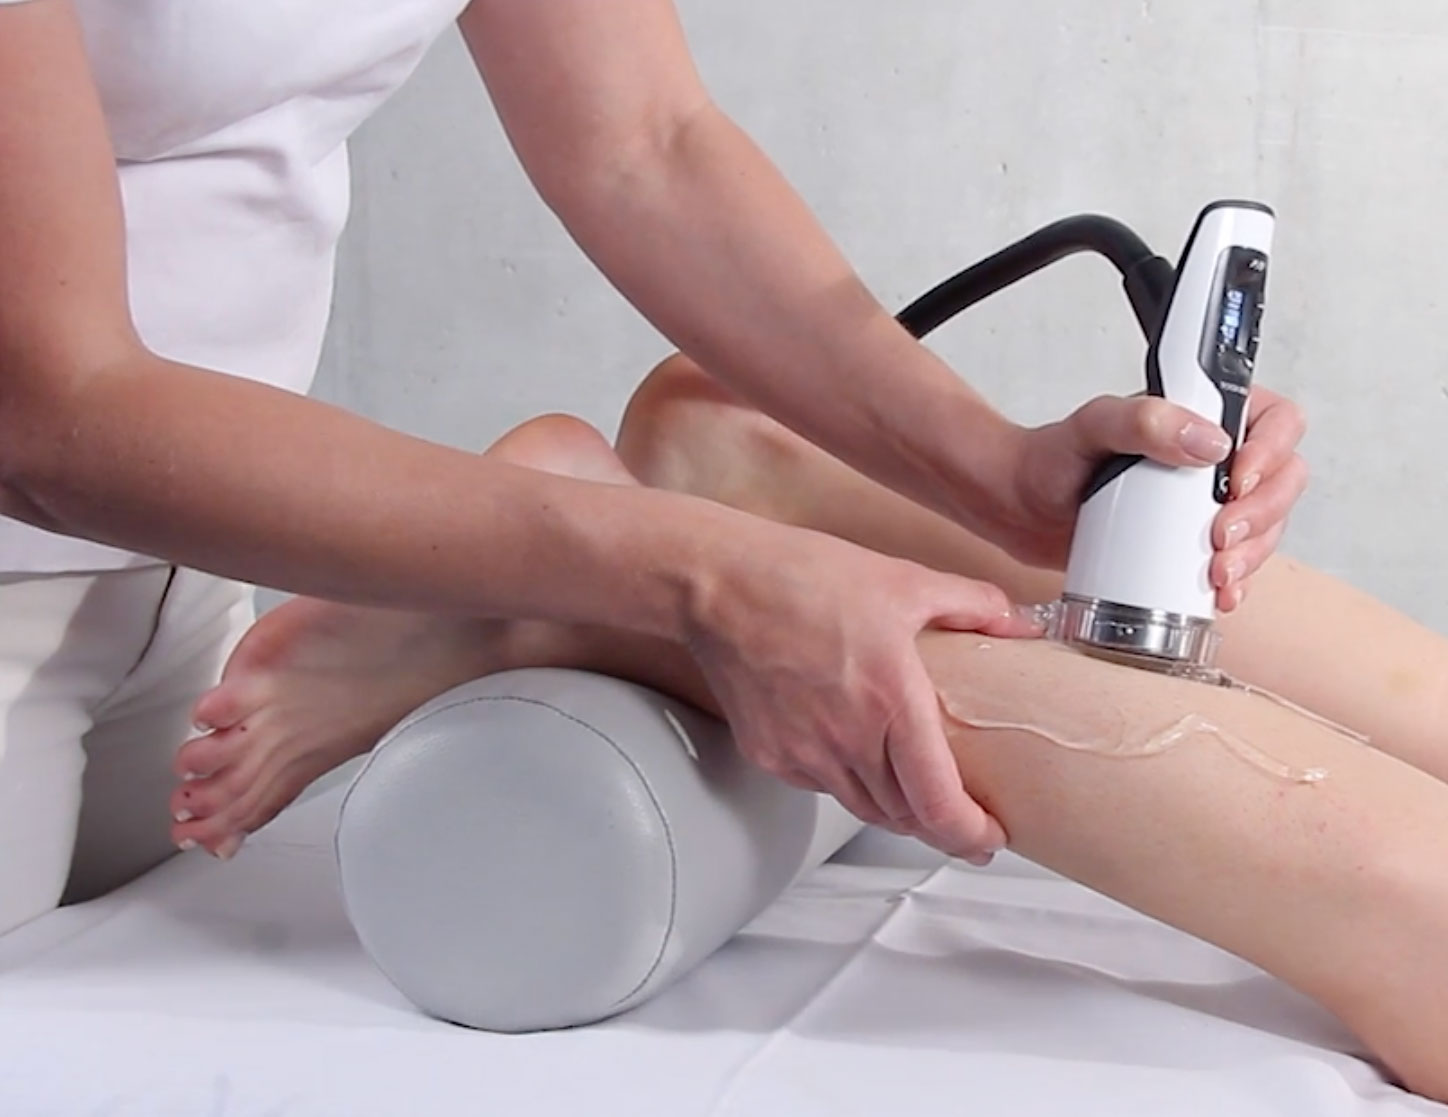 Shockwave Therapy calf treatment